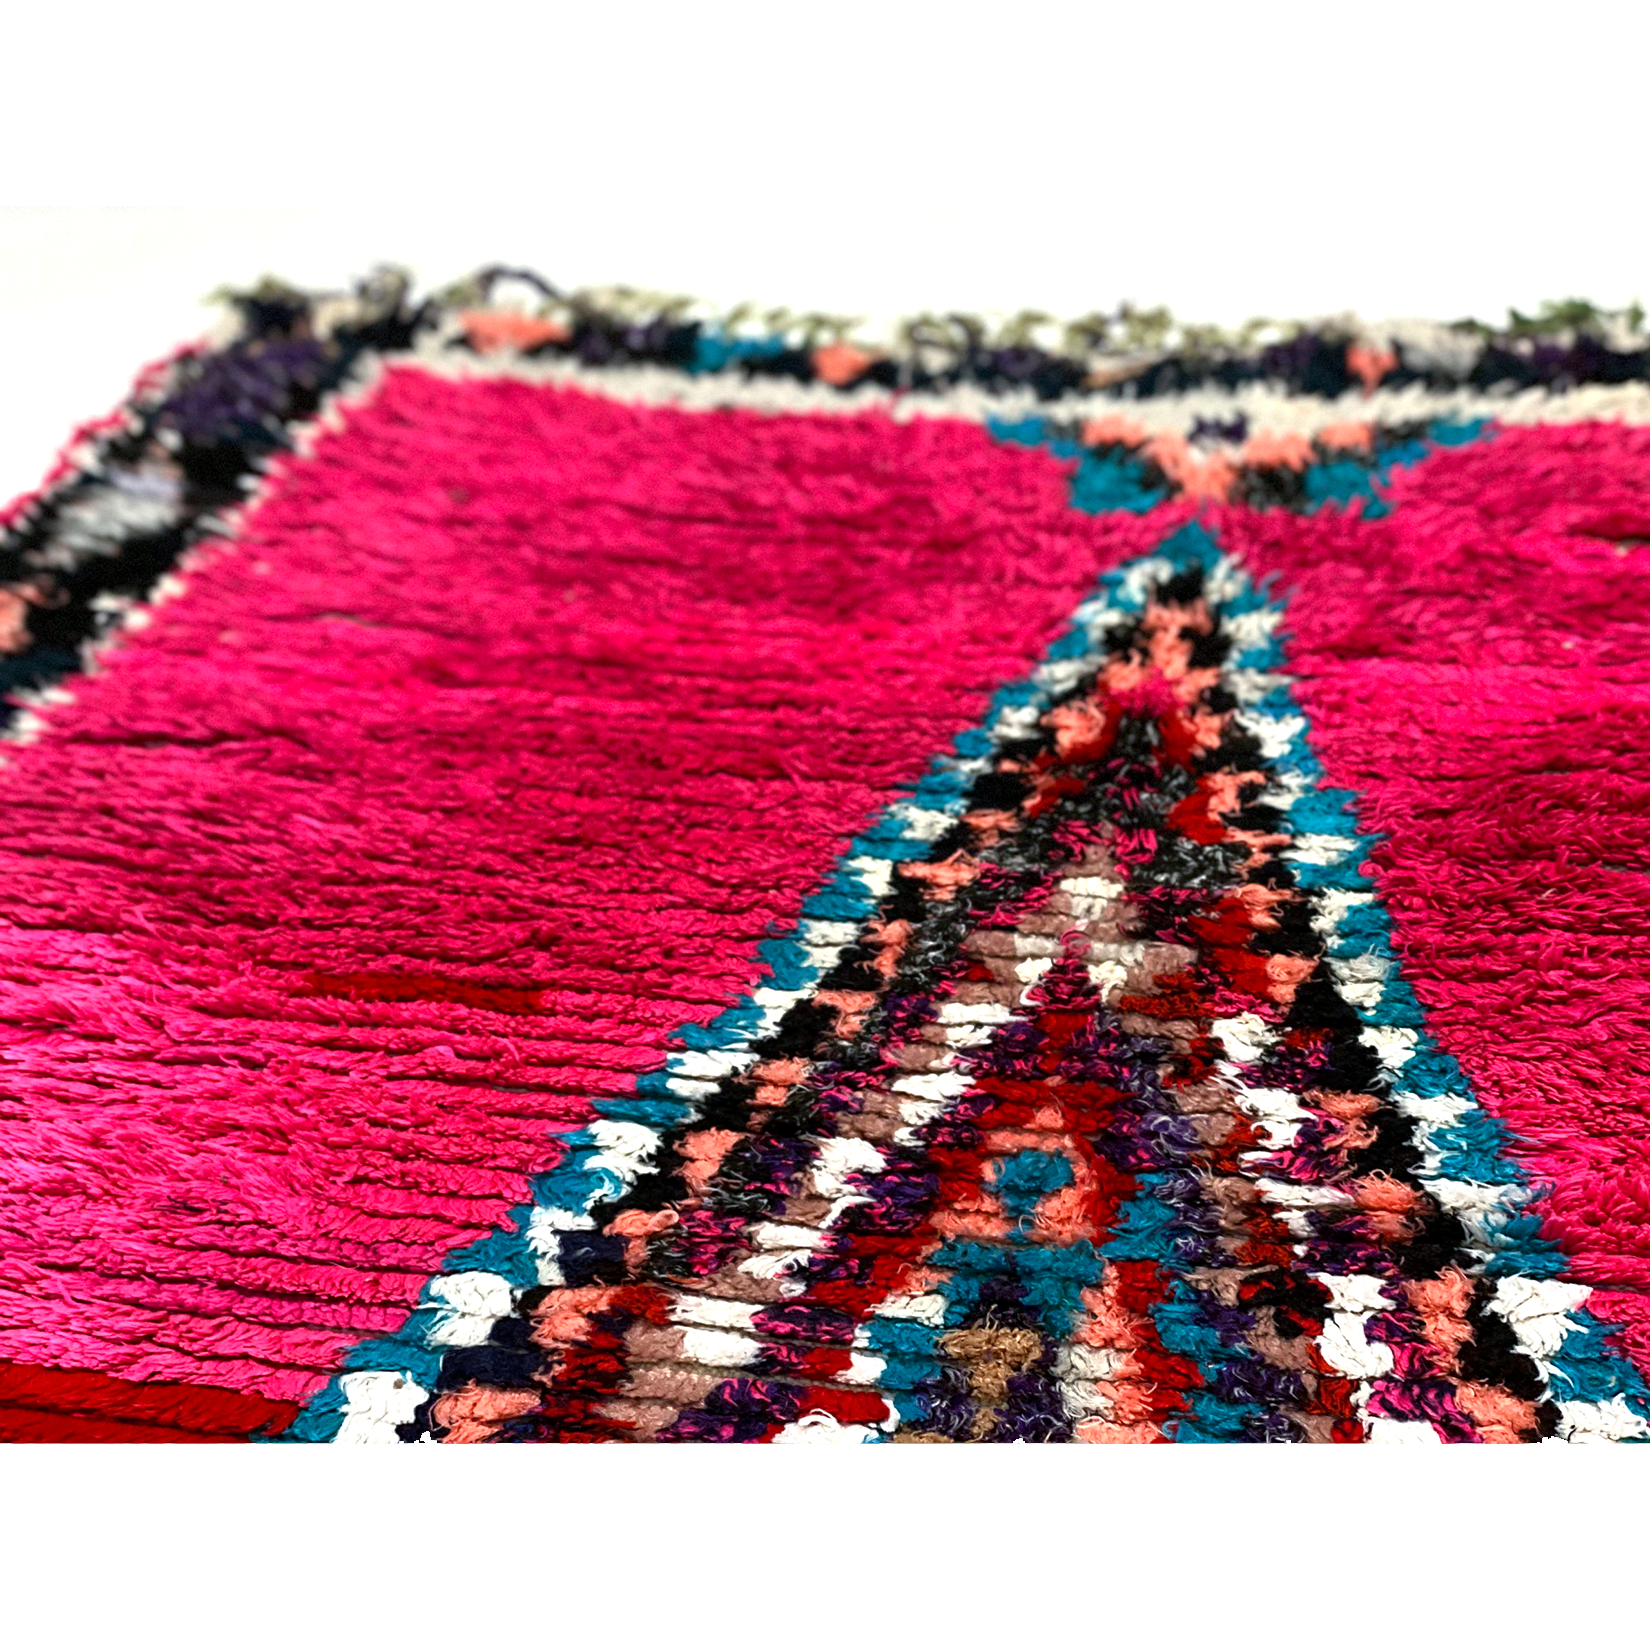 Pink Moroccan entryway rug with colorful details - Kantara | Moroccan Rugs